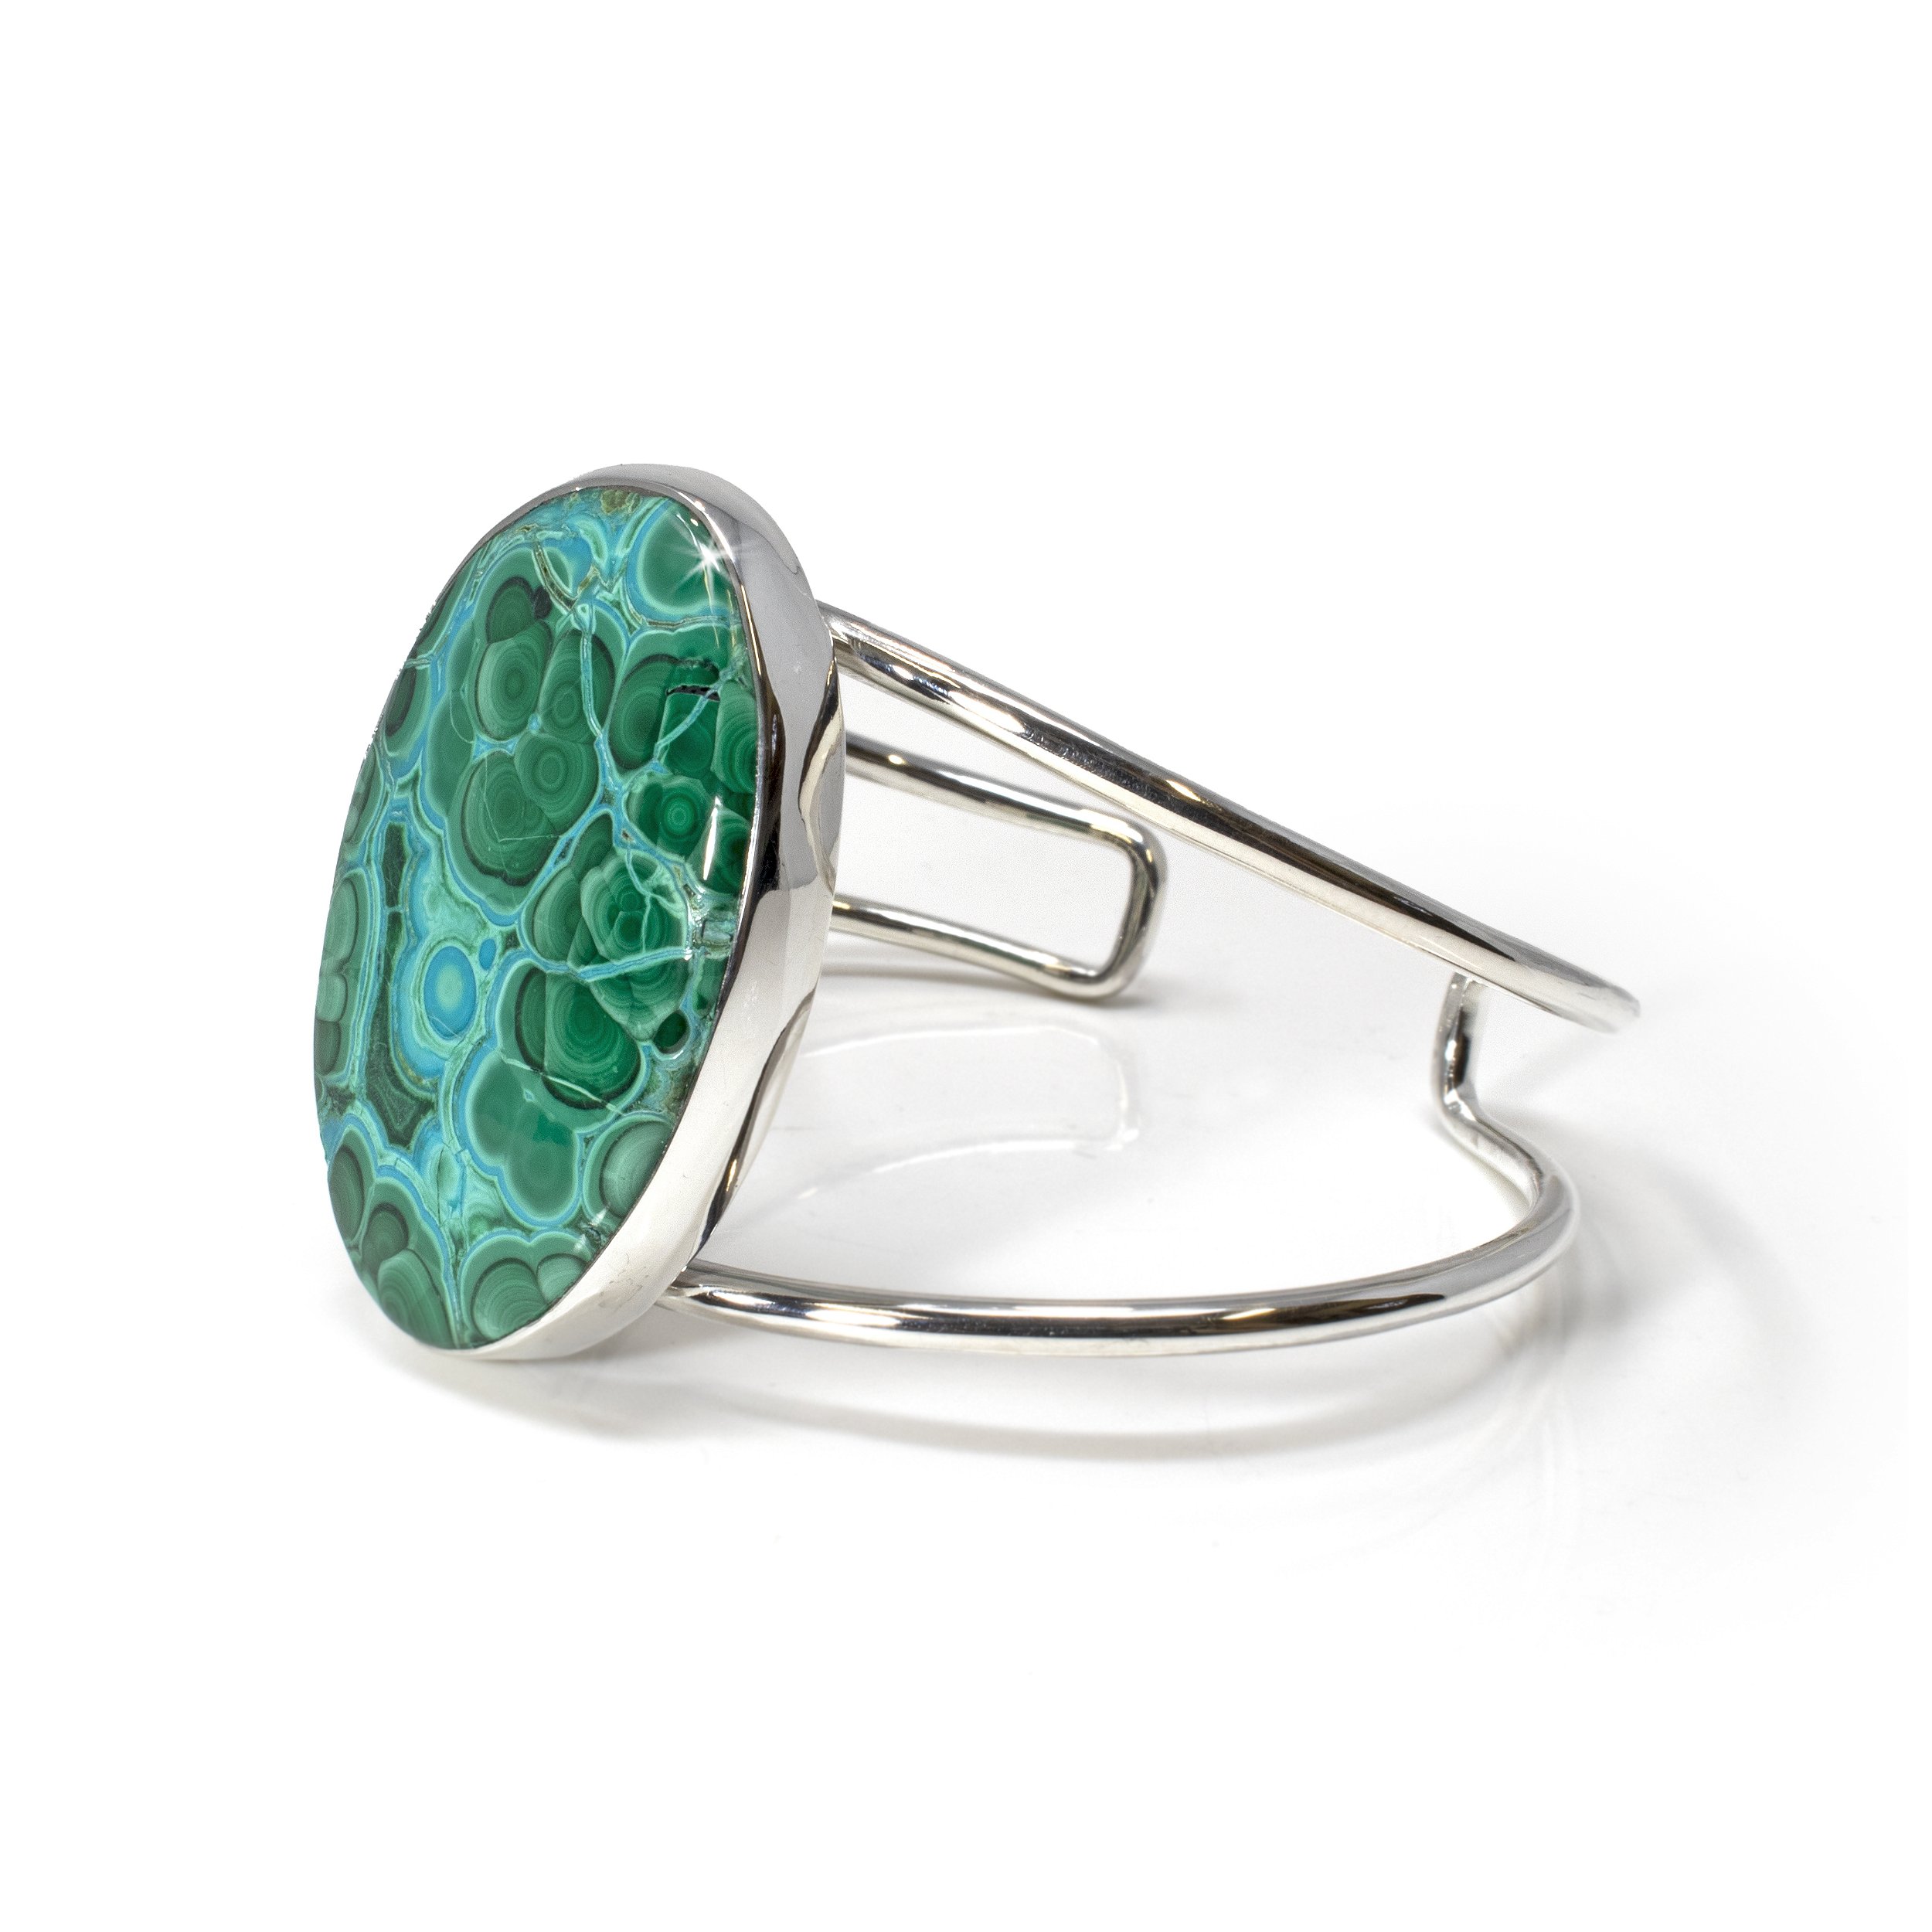 Chrysocolla Malachite Cuff Bracelet - Oval Cabochon With Simple Silver Bezel On Open Double Band